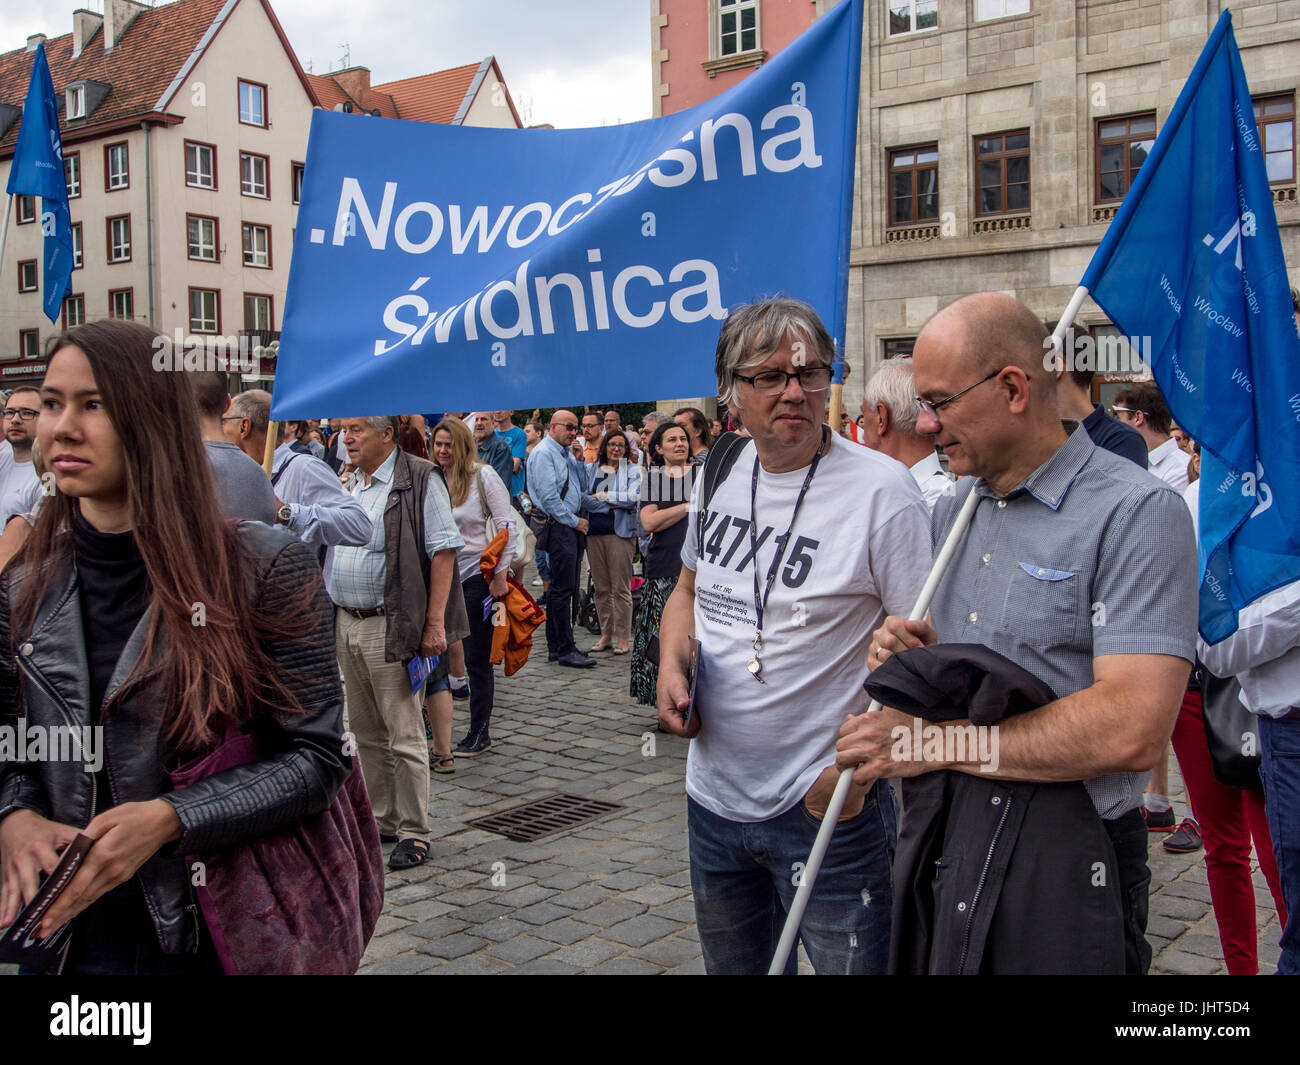 Wroclaw, Poland. 15th July, 2017. Members of the KOD (The committee for the defence of democracy) in Wroclaw an NGO that promotes European values such as Democracy, Rule of Law and Human Rights organised a massive rally and protest against the government led by the Law & Justice Party. There were Police in attendance but the demonstration went off peacefully. The crowd were addressed by several speakers from the KOD. Credit: Veteran Photography/Alamy Live News Stock Photo